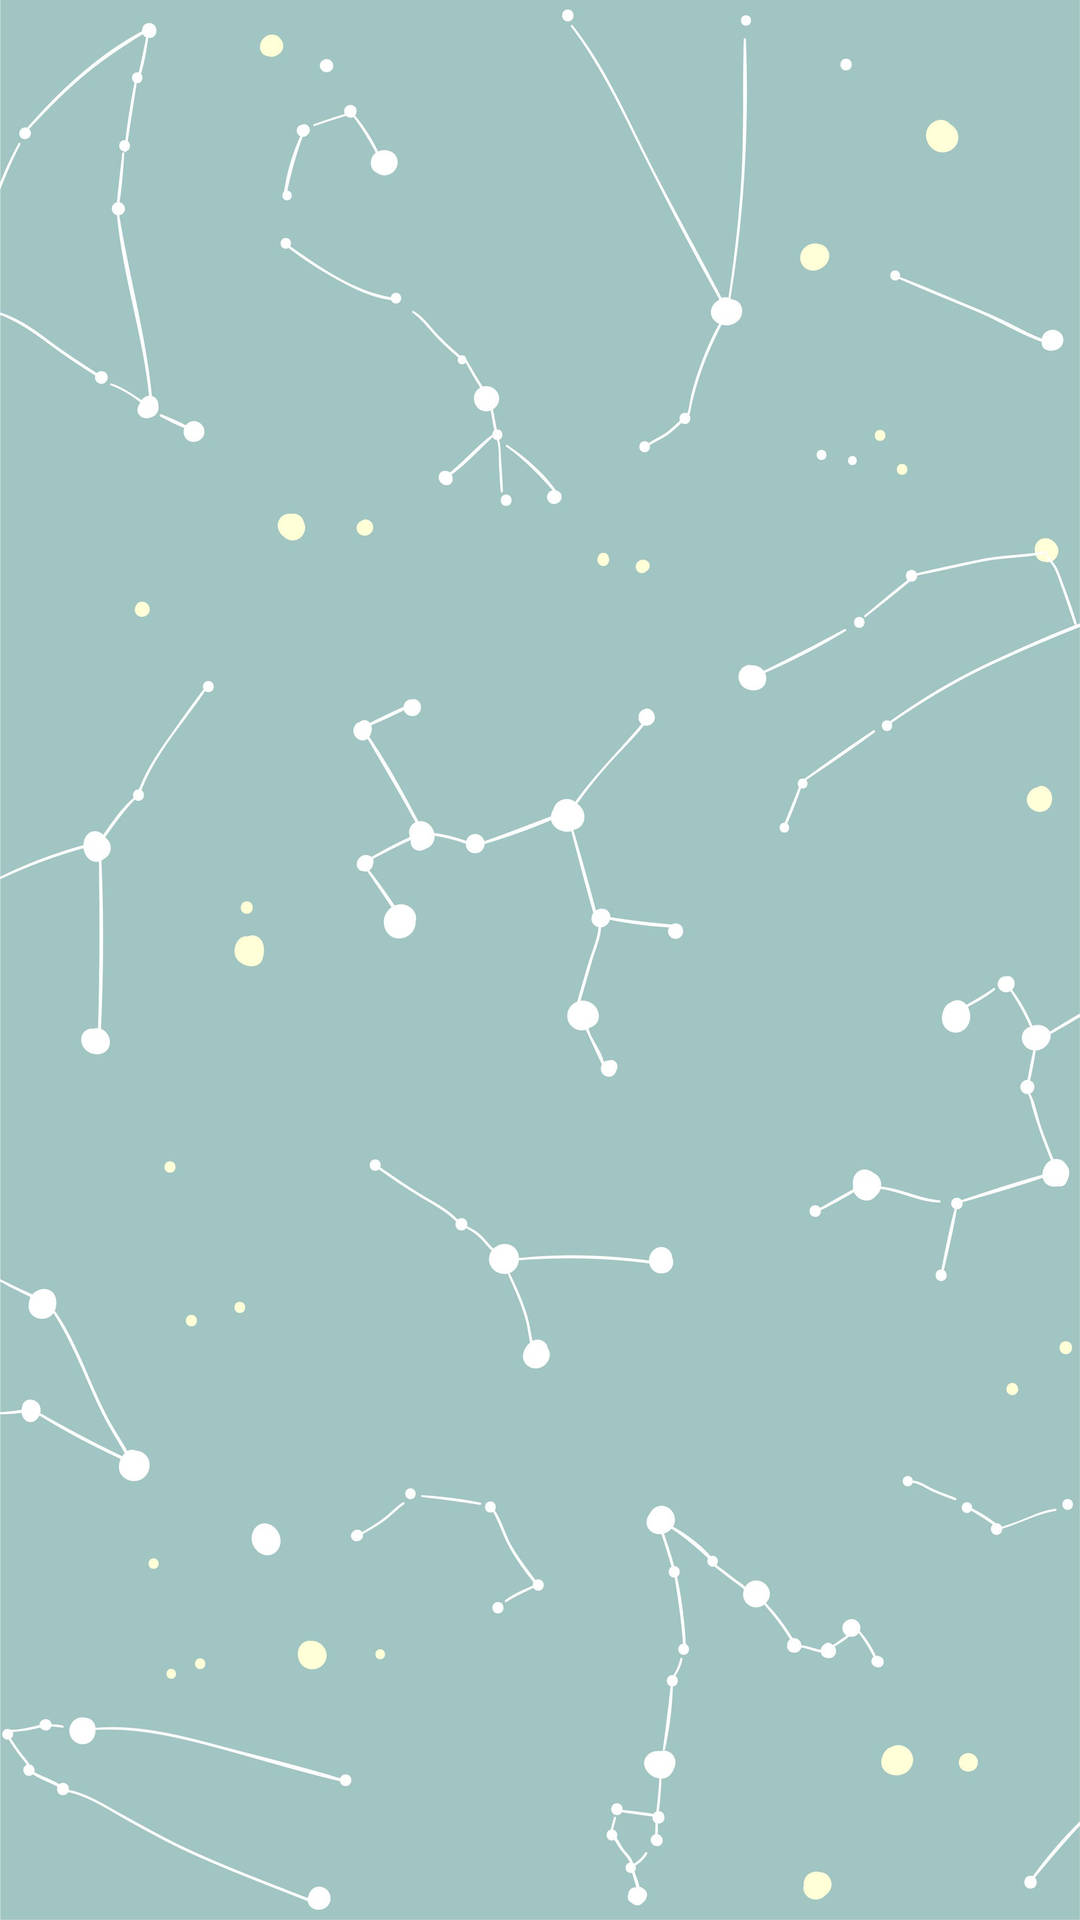 Aesthetic Constellation Wallpapers